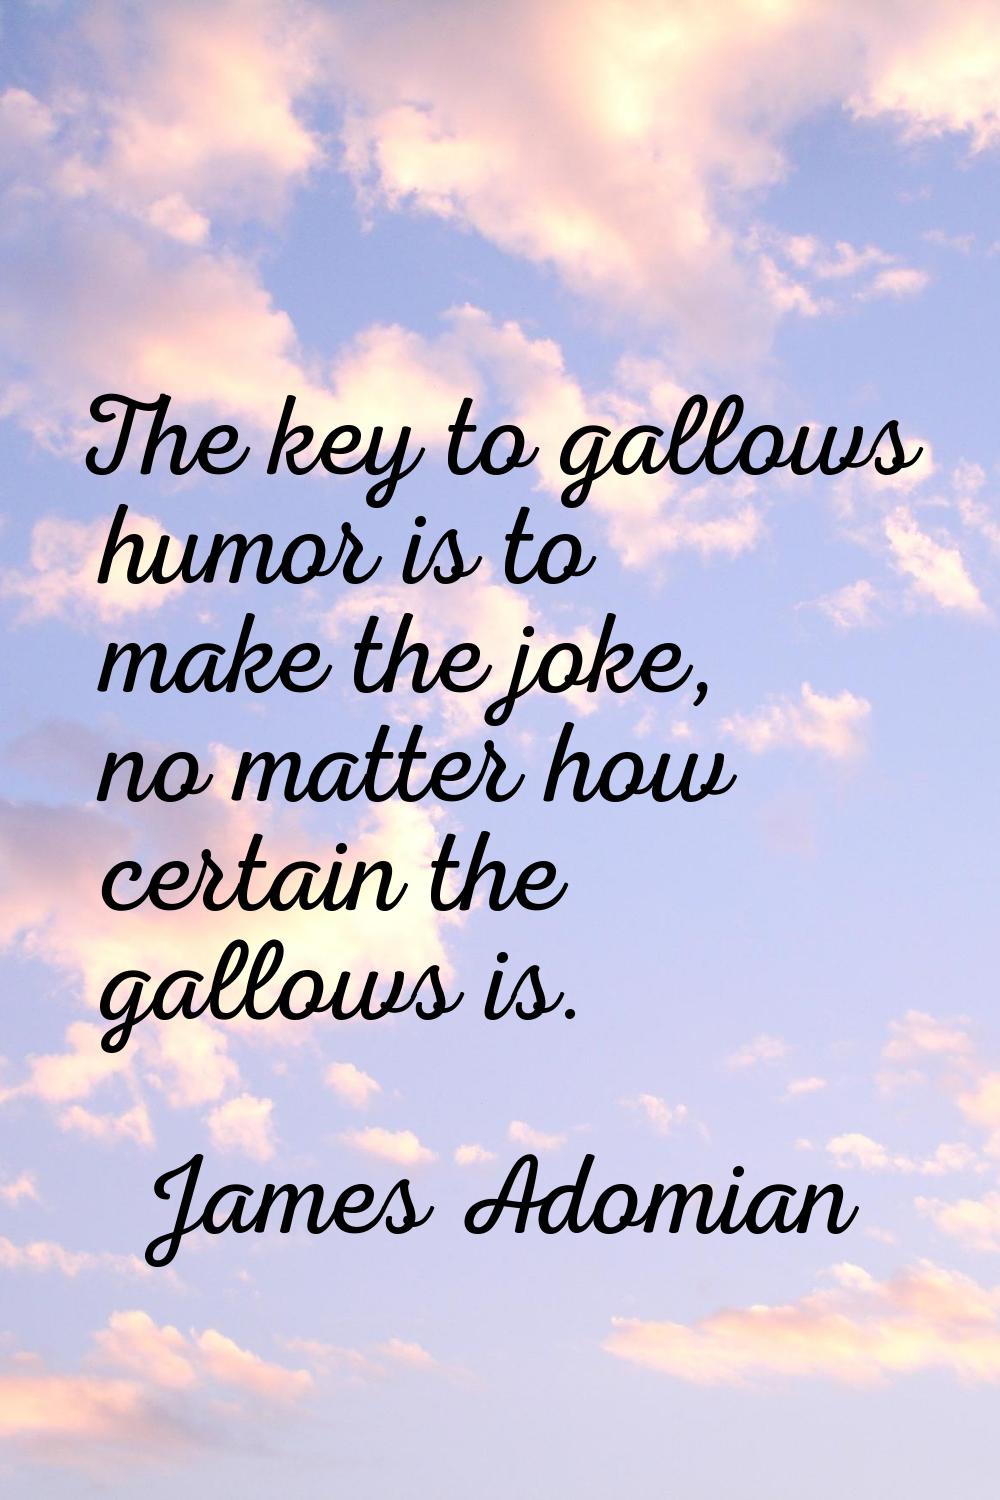 The key to gallows humor is to make the joke, no matter how certain the gallows is.